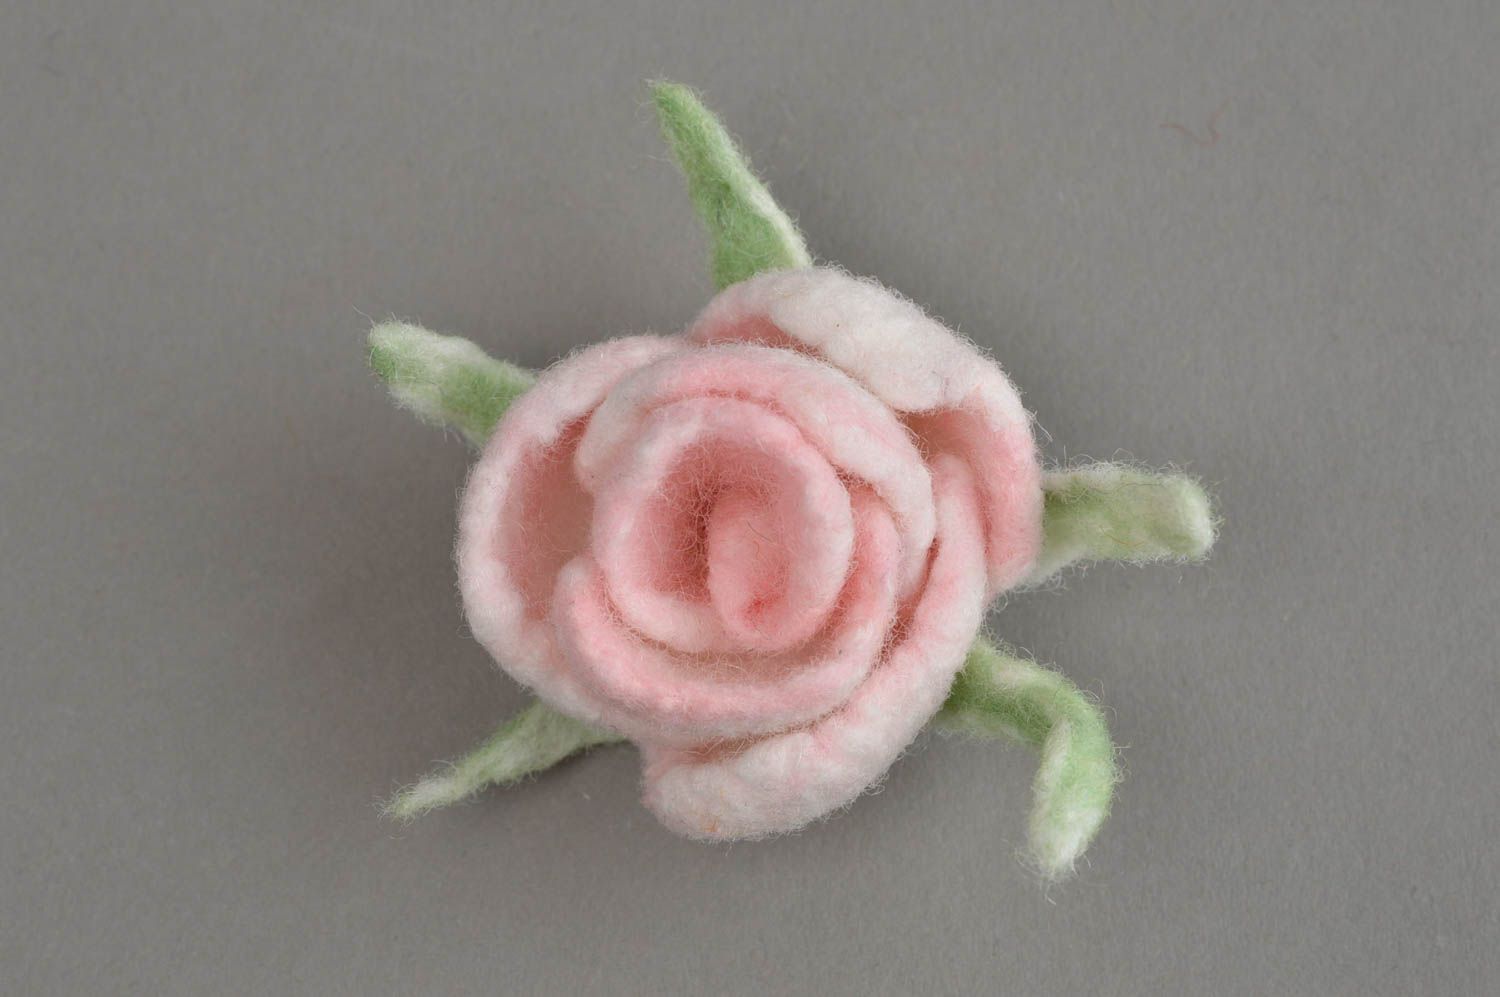 Handmade flower brooch handcrafted jewelry brooch pin fashion accessories photo 2